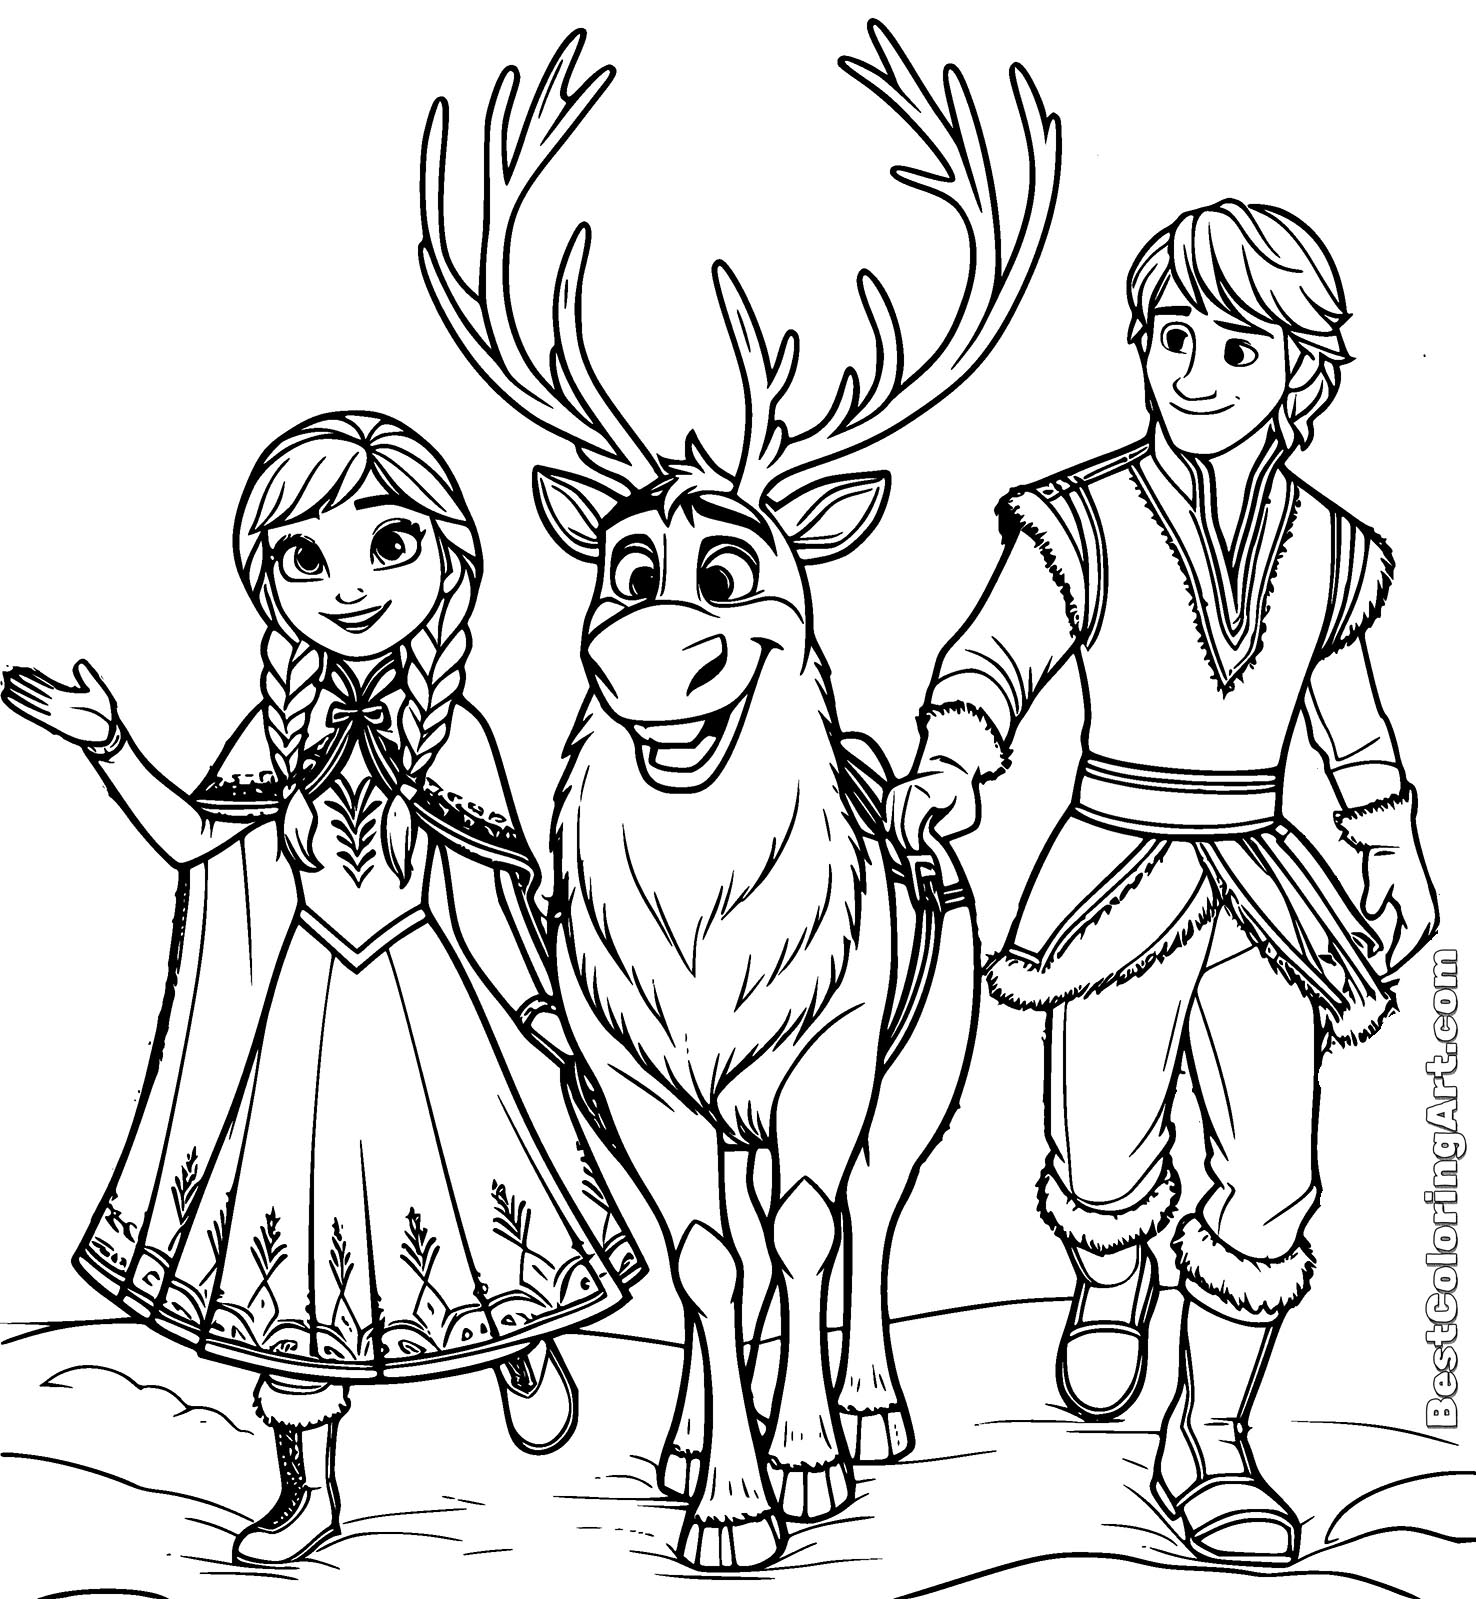 Anna, Kristoff and Swen Coloring Page - Printable & Free PDFs